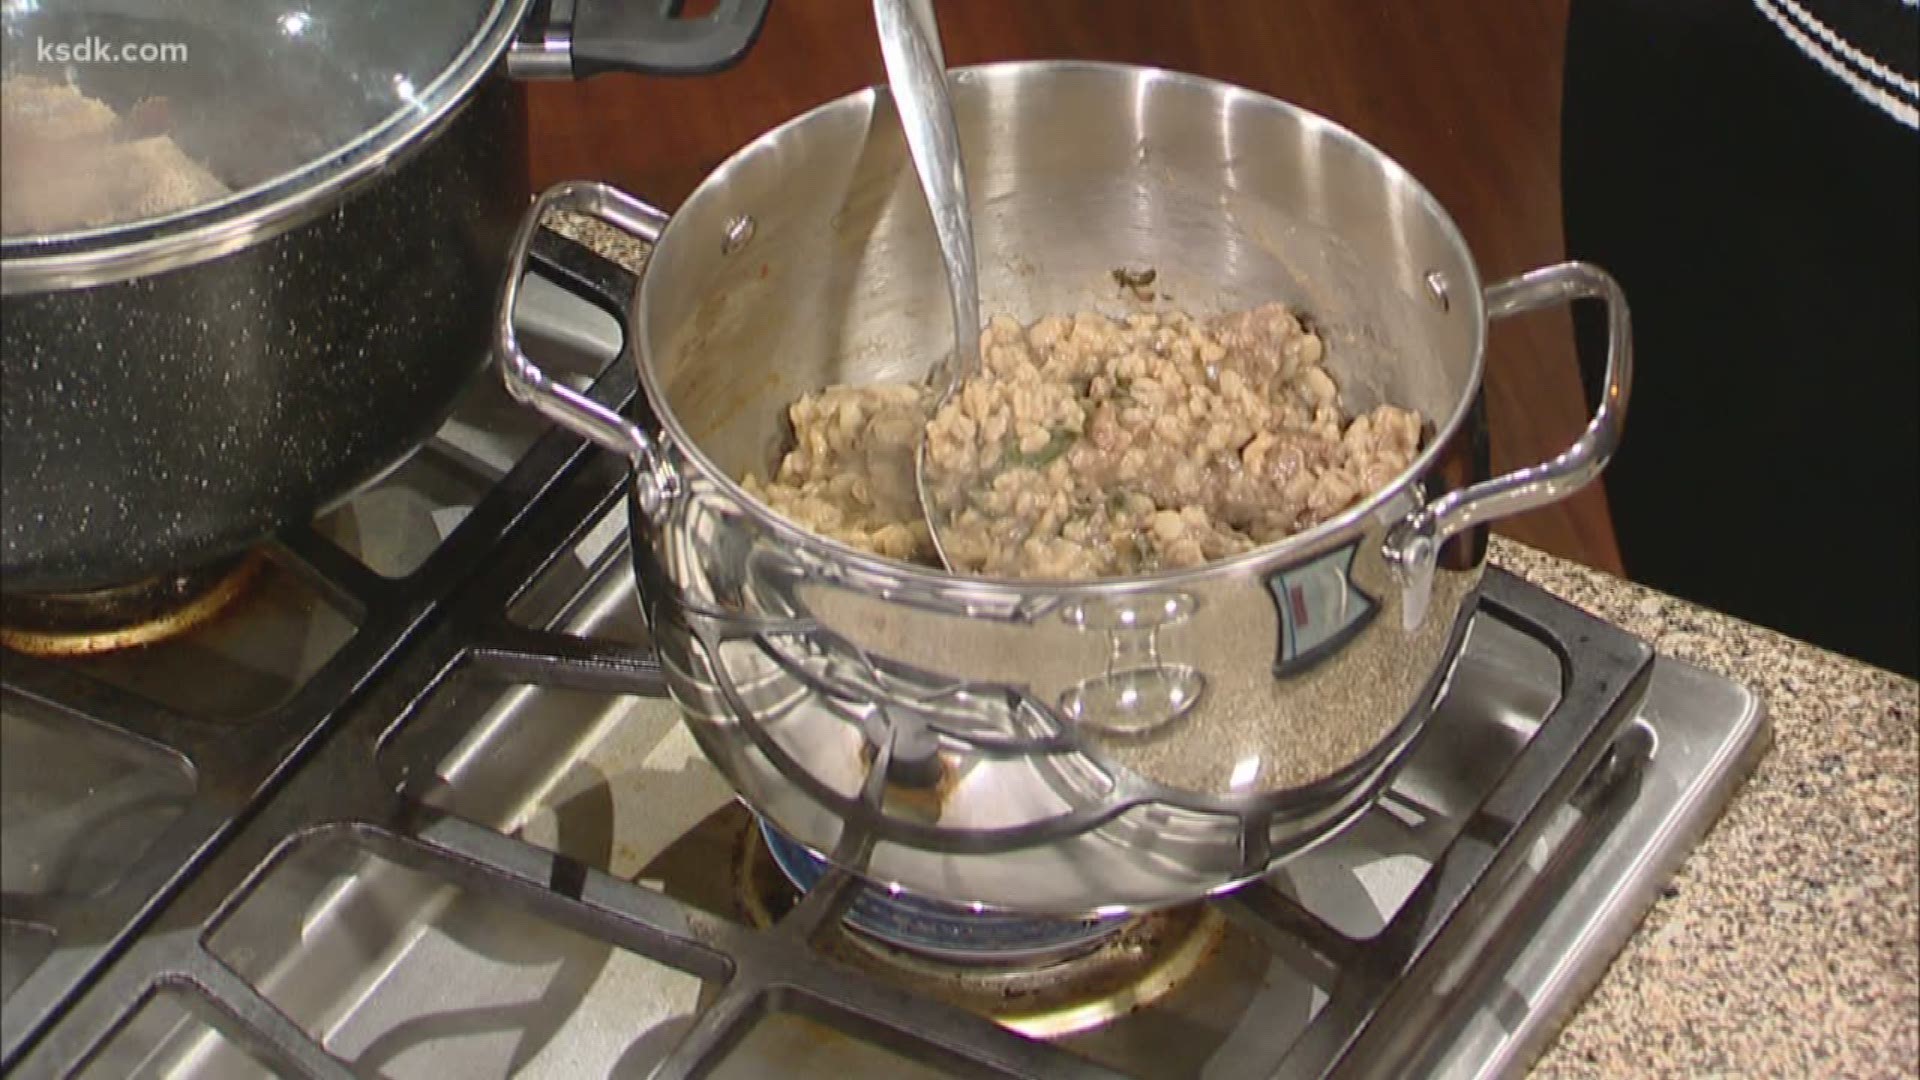 Luella Gregory of the Missouri Beef Council shared a delicious soup recipe for those cold winter days.